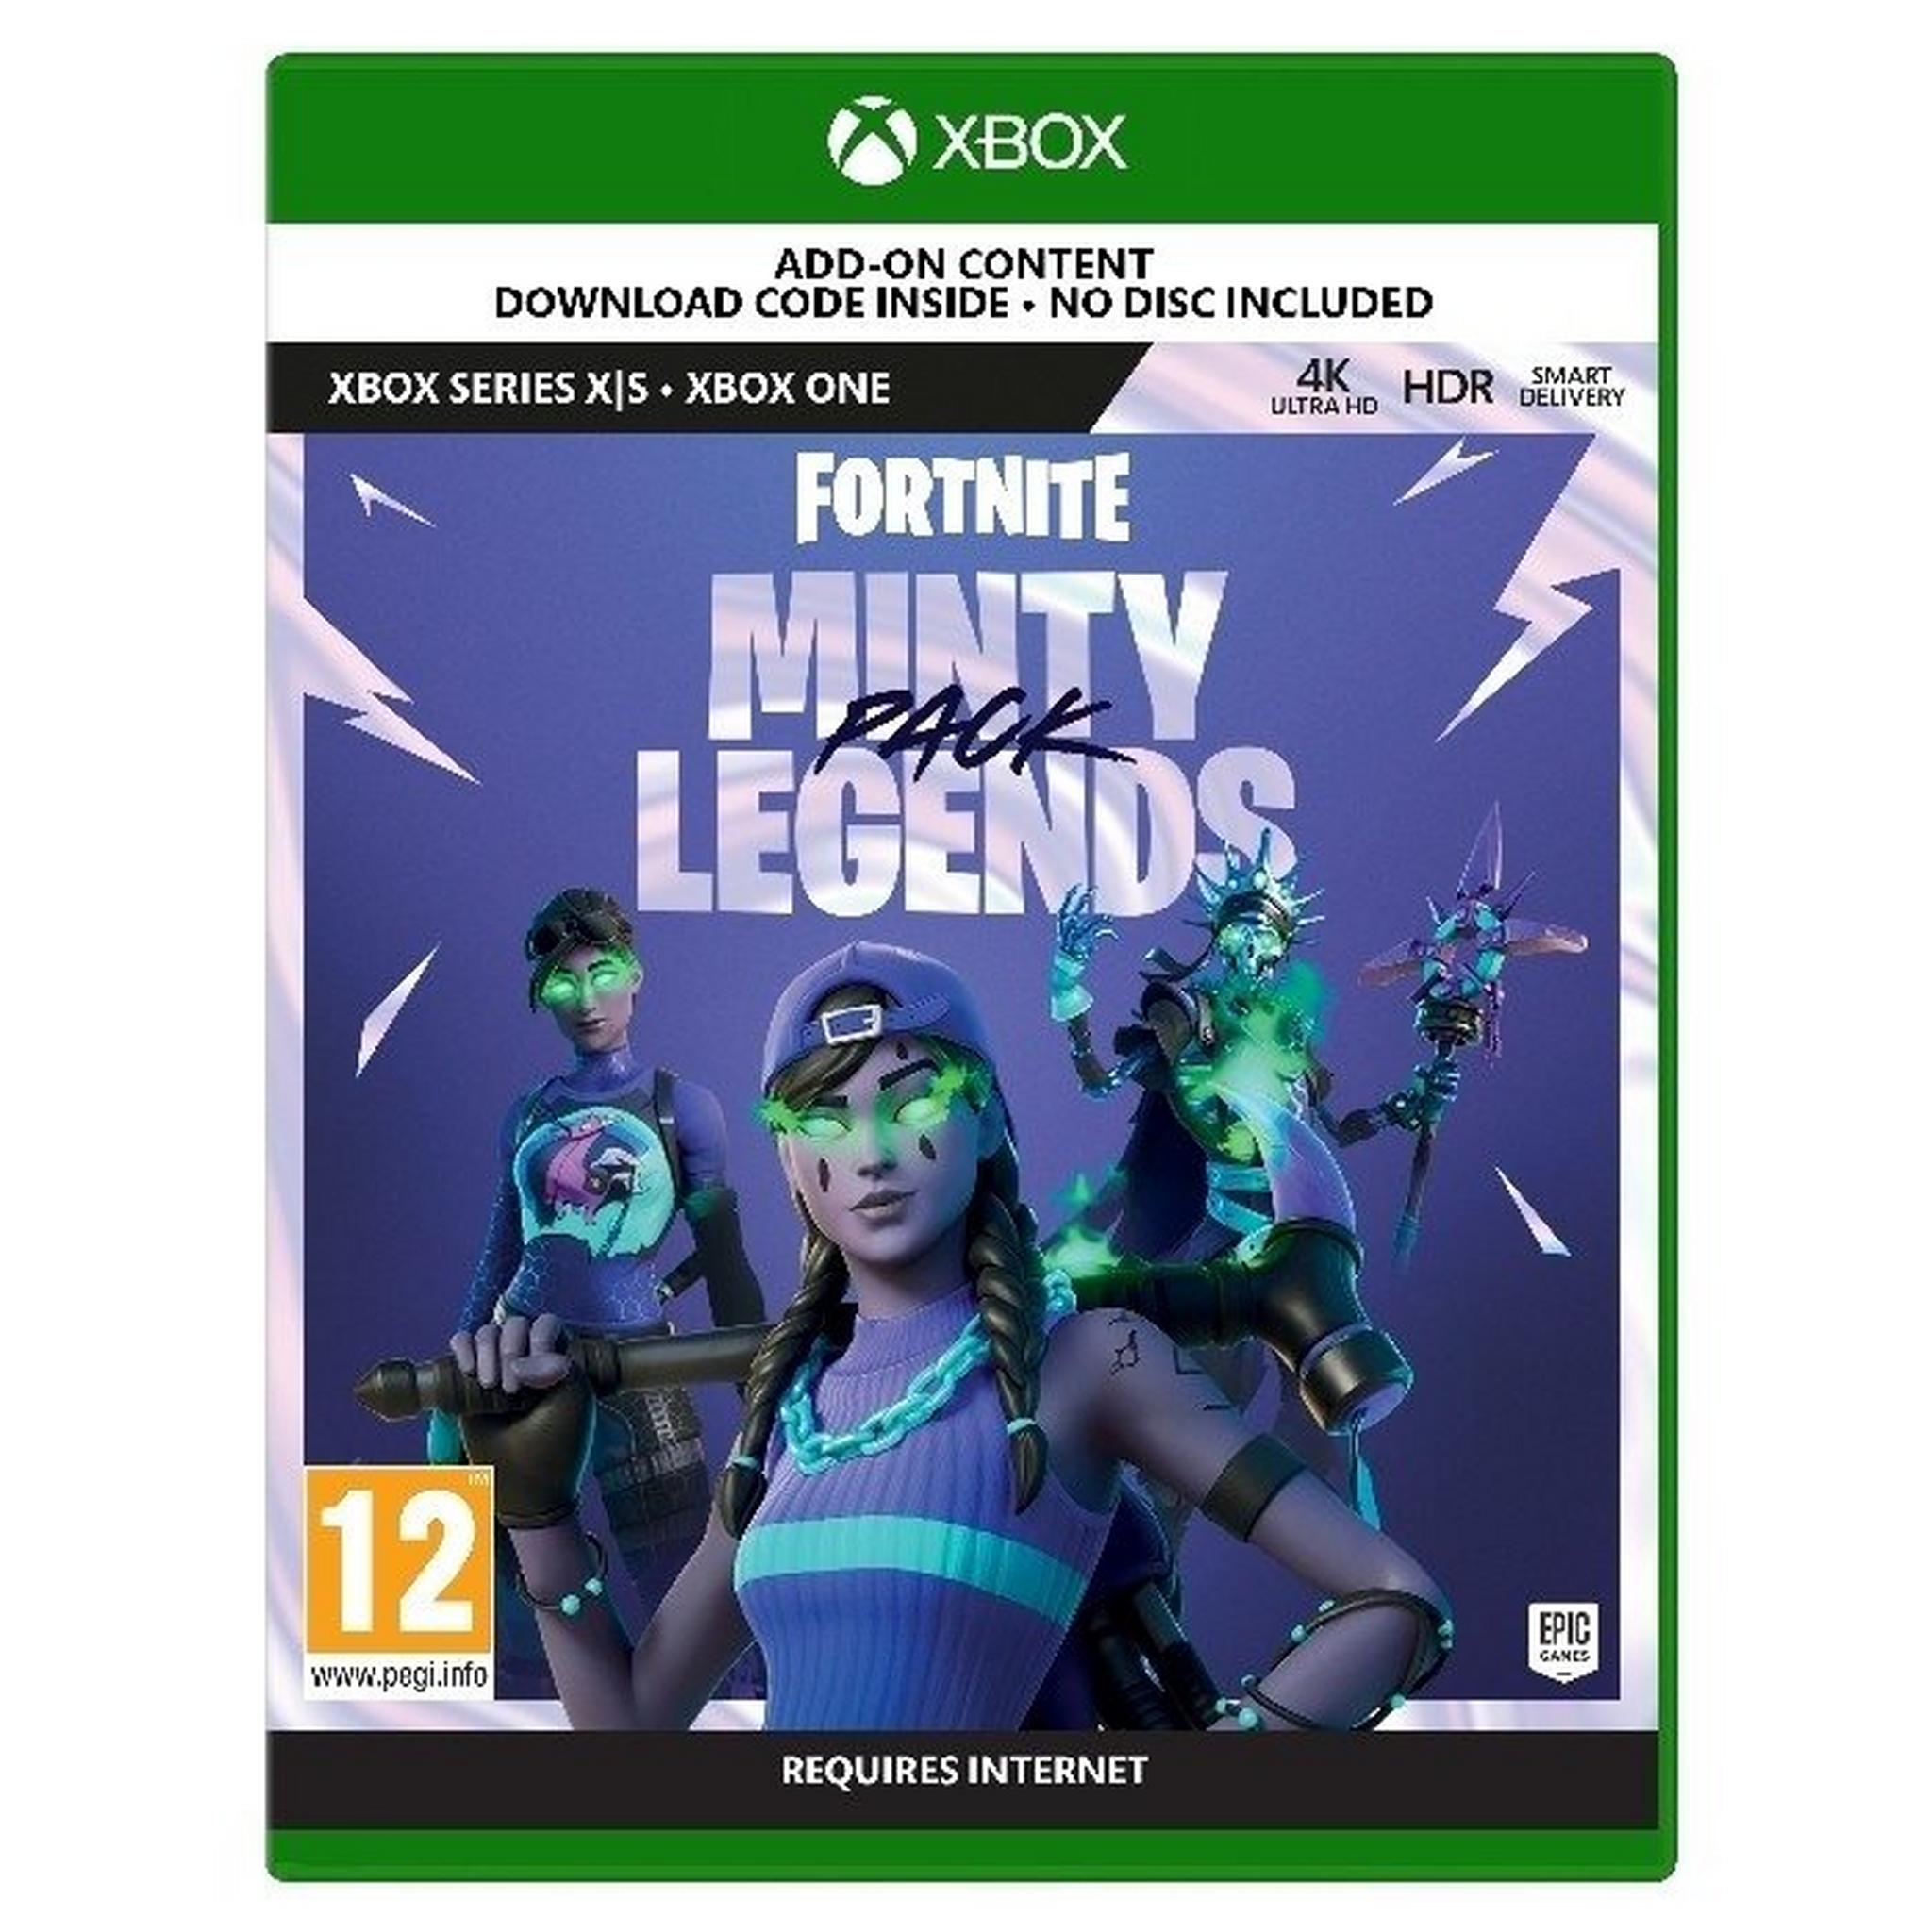 Fortnite Minty Legends Pack - Xbox Series X Game